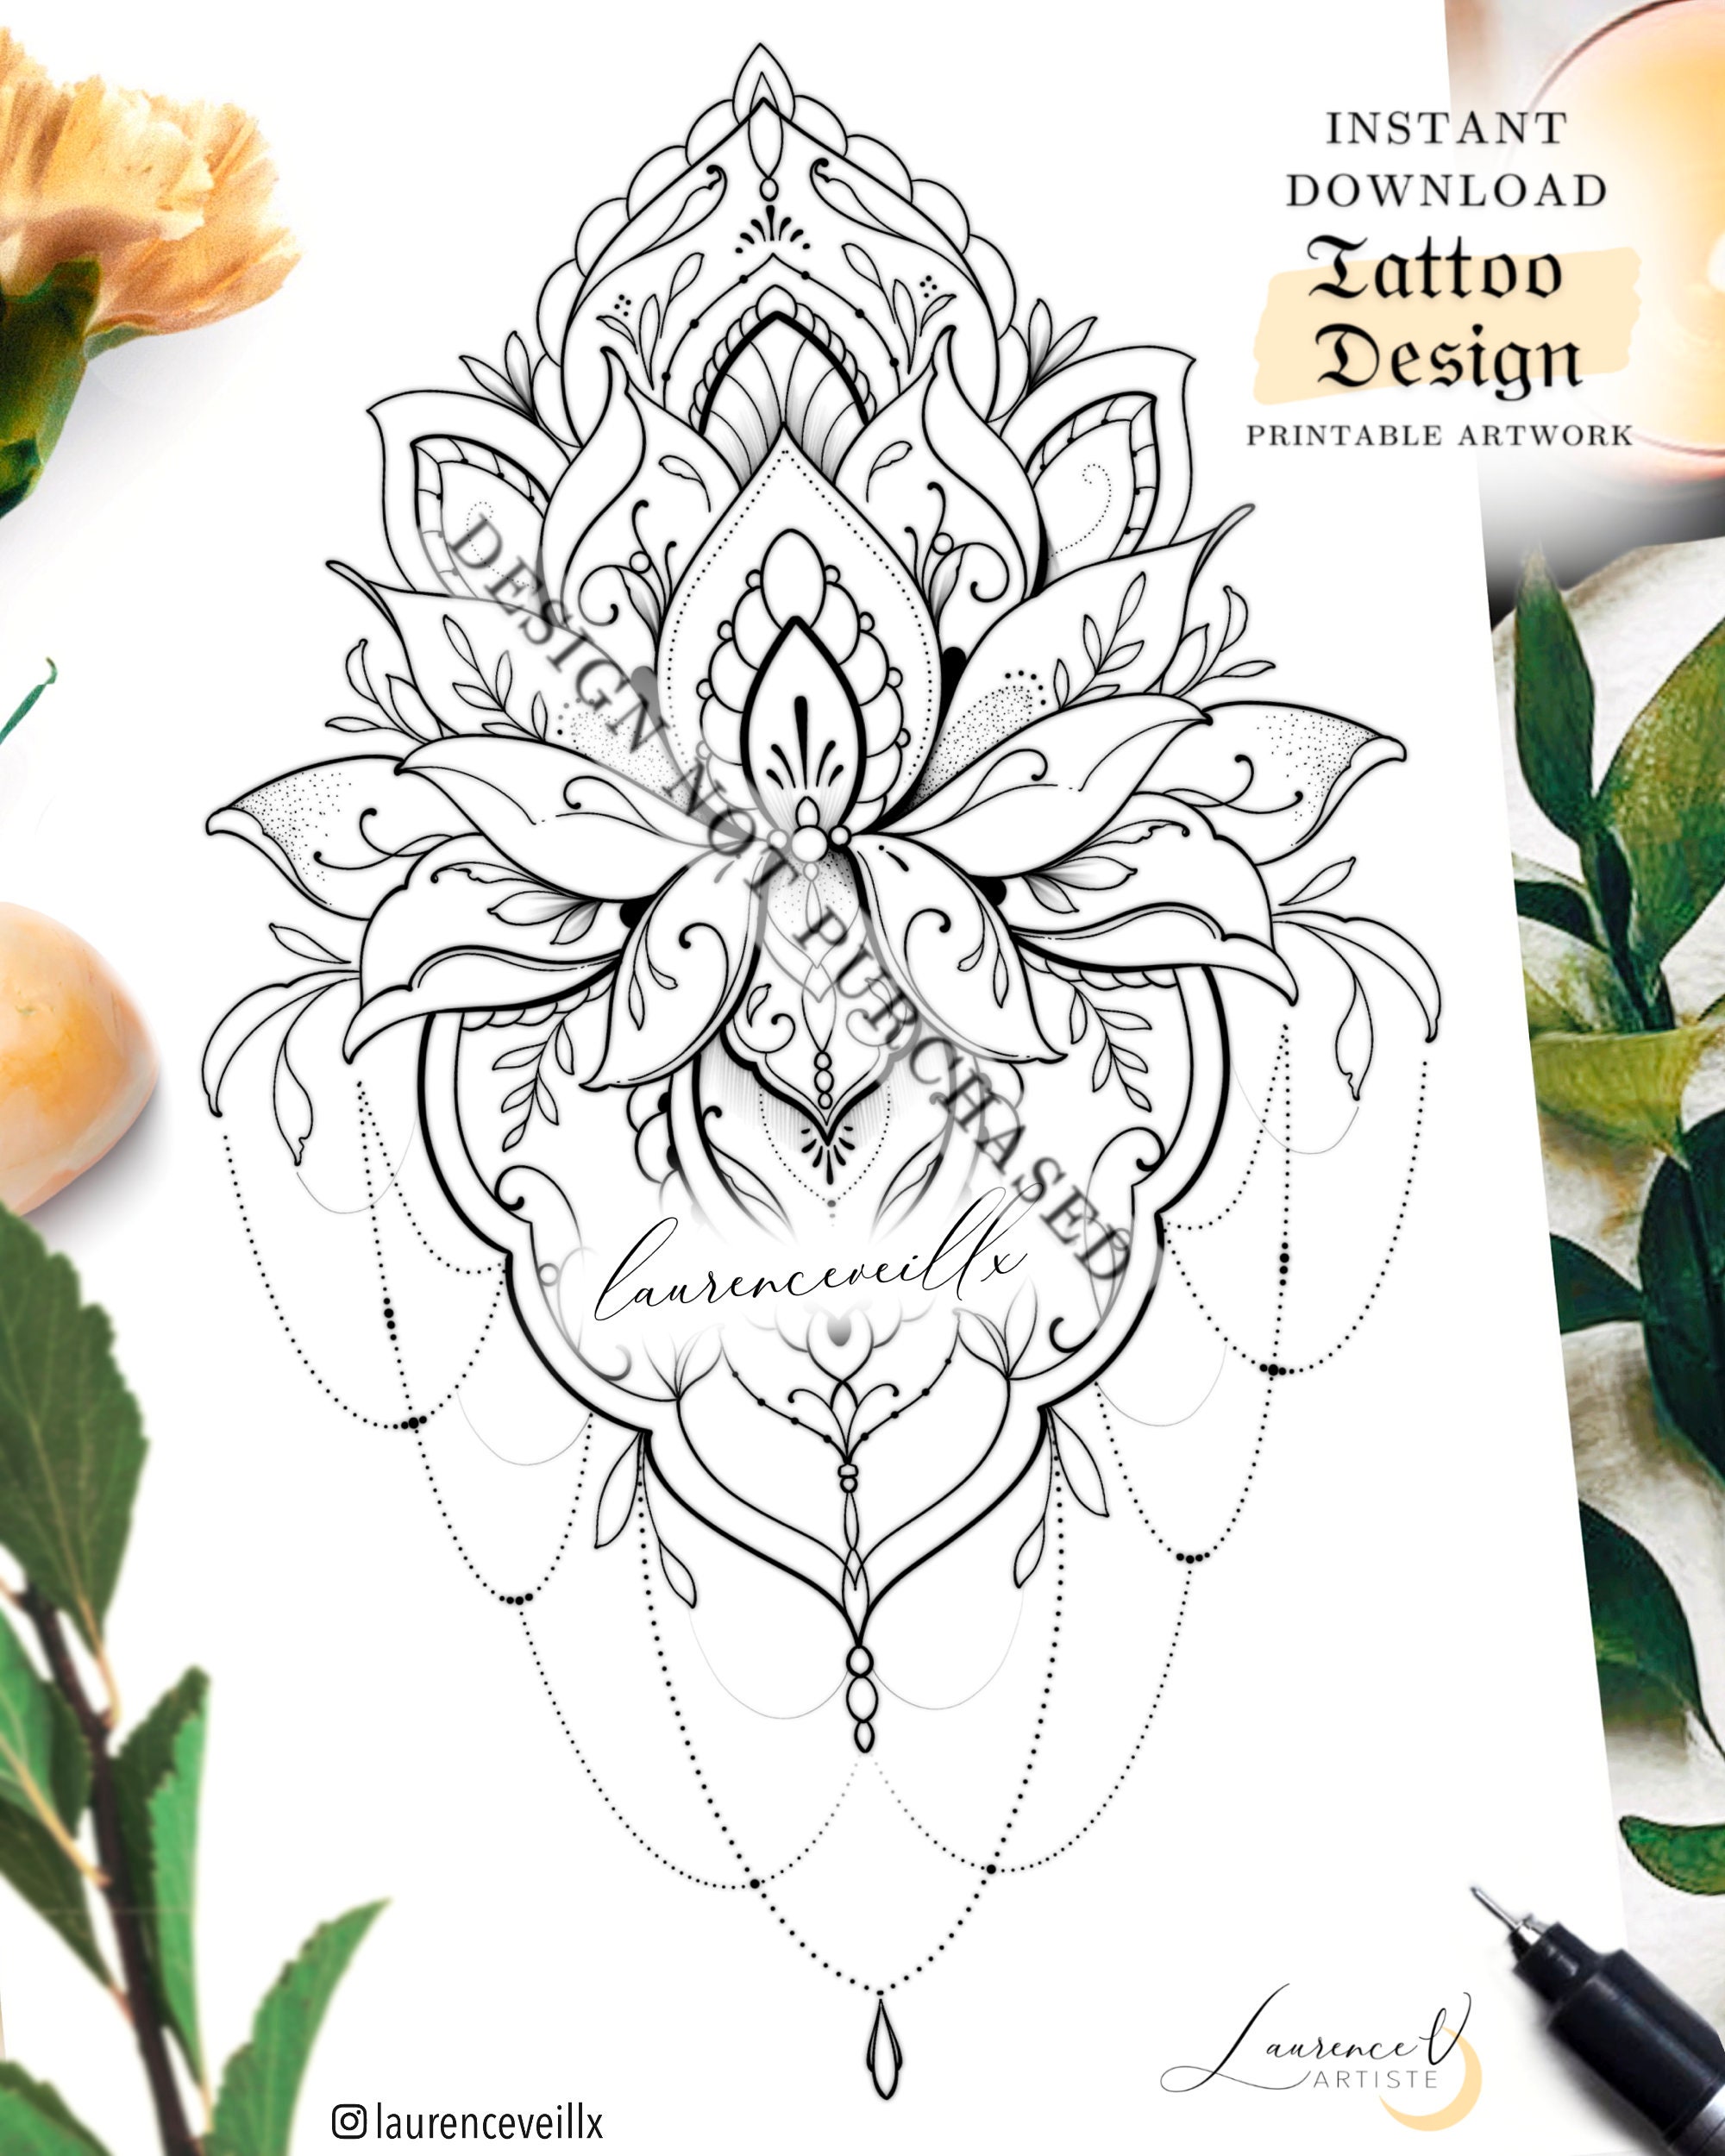 Your photo of tattoo converted into stencil or a sketch | Upwork